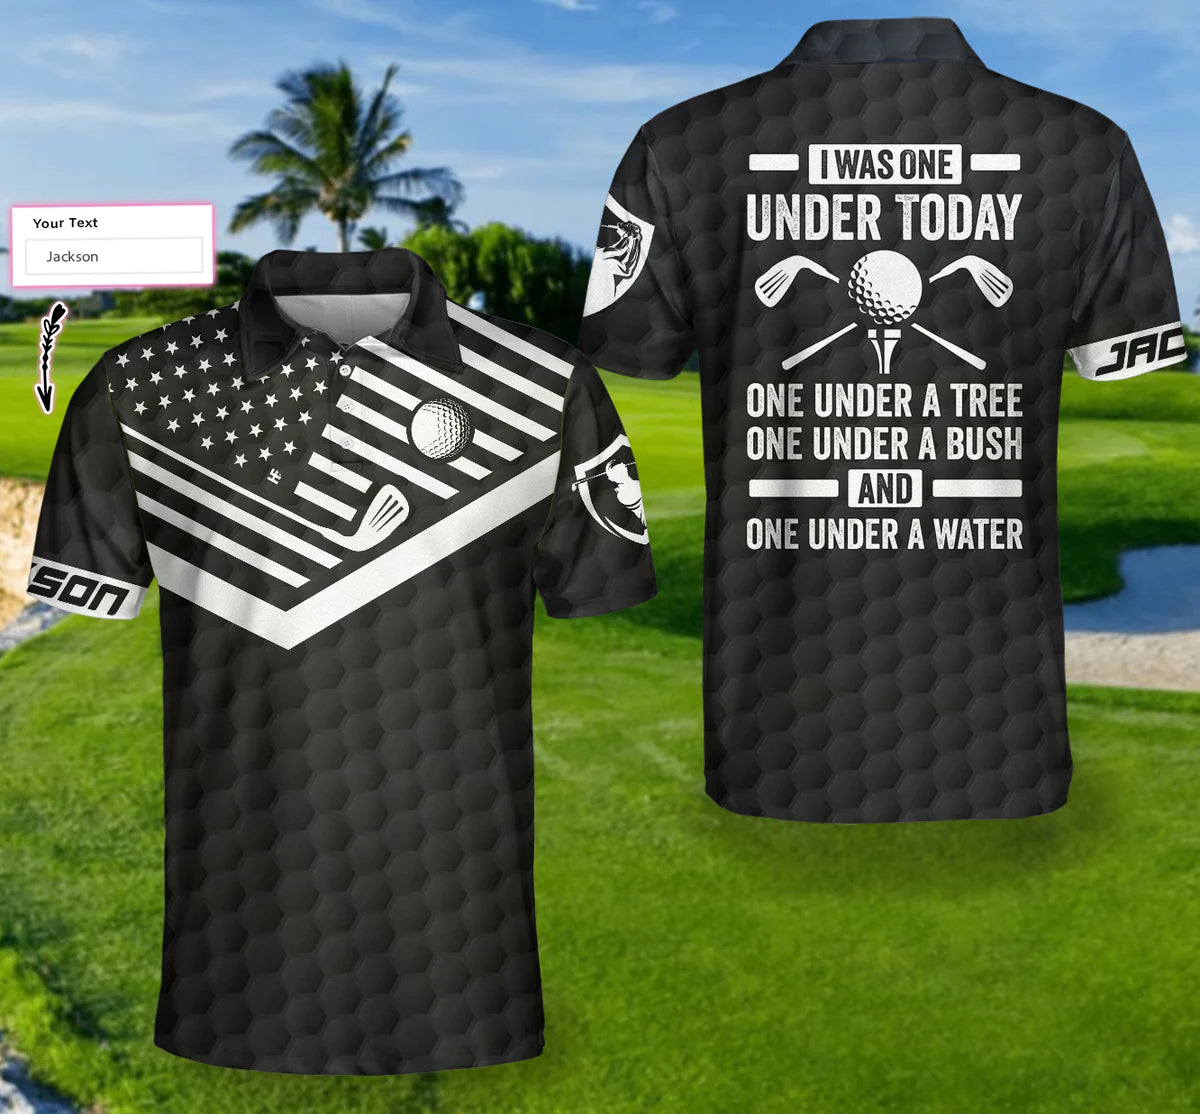 personalized american flag golf shirt for men my score was one under today on the polo shirt gp424 ijn2h